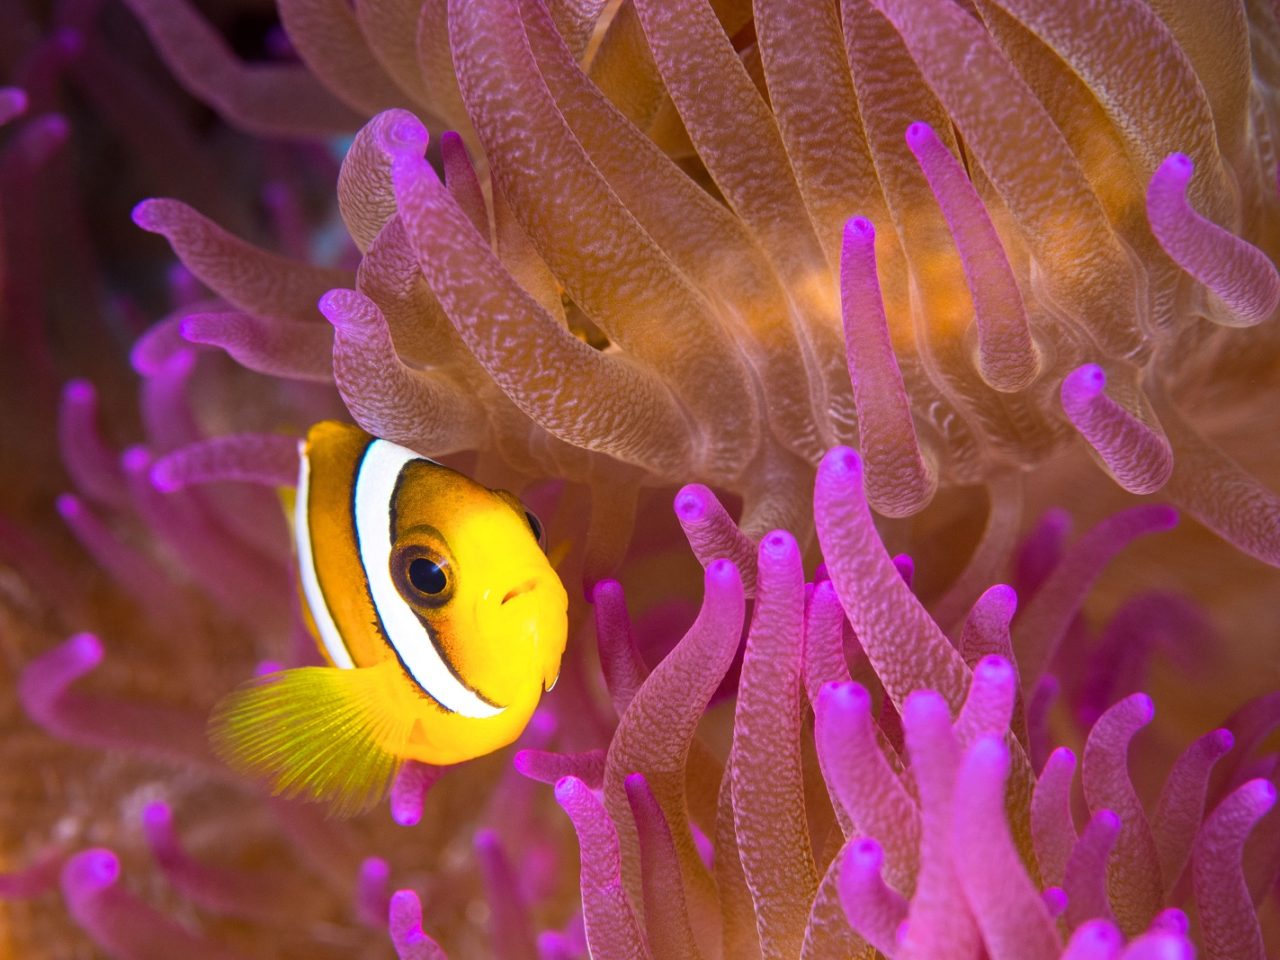 a clownfish in a pink and orange anemone encountered while diving in Raja Ampat